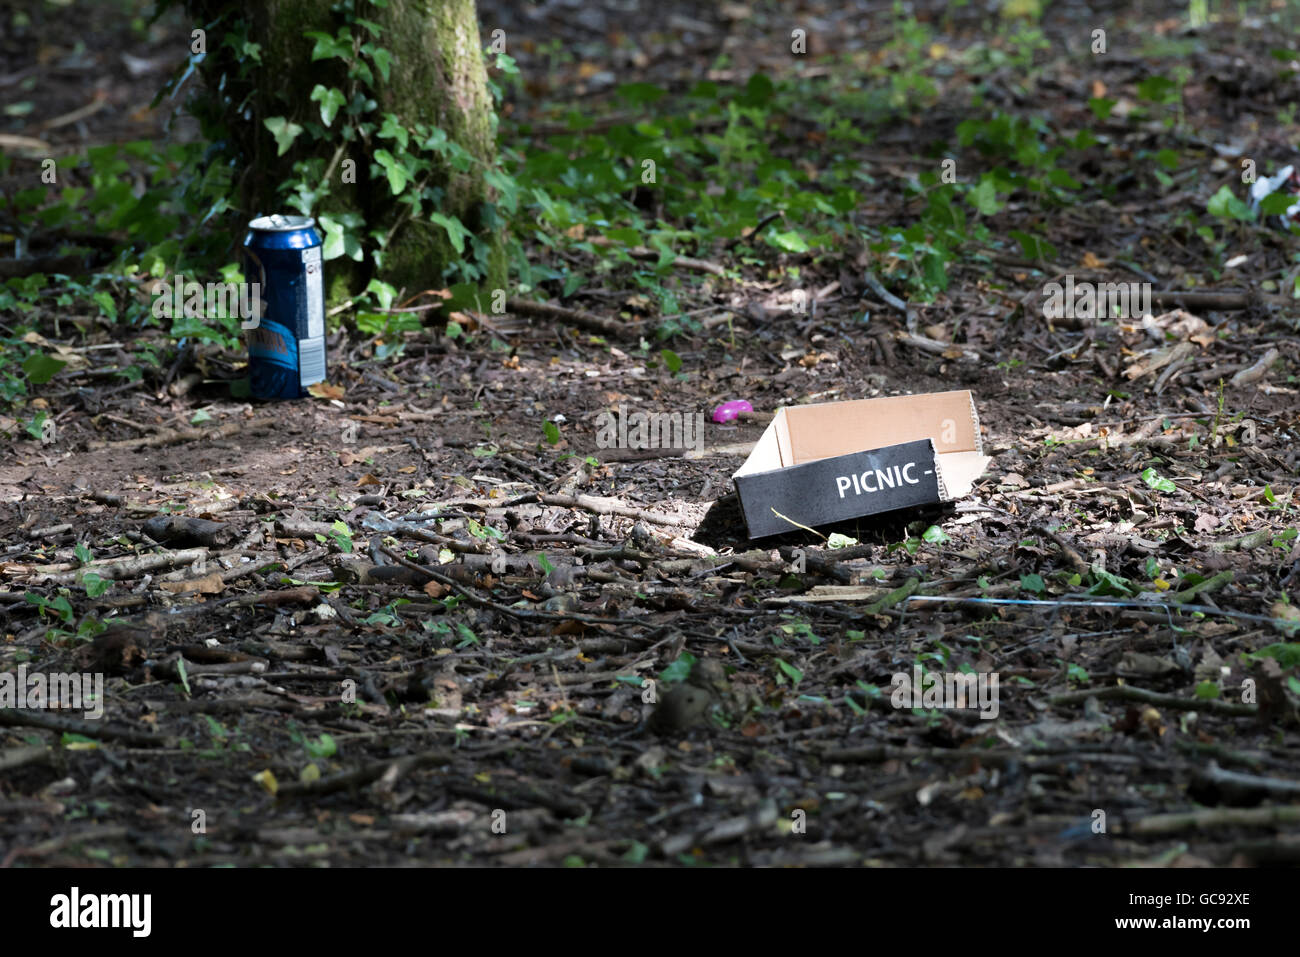 Abandoned picnic site with cardboard container and drinks can Stock Photo